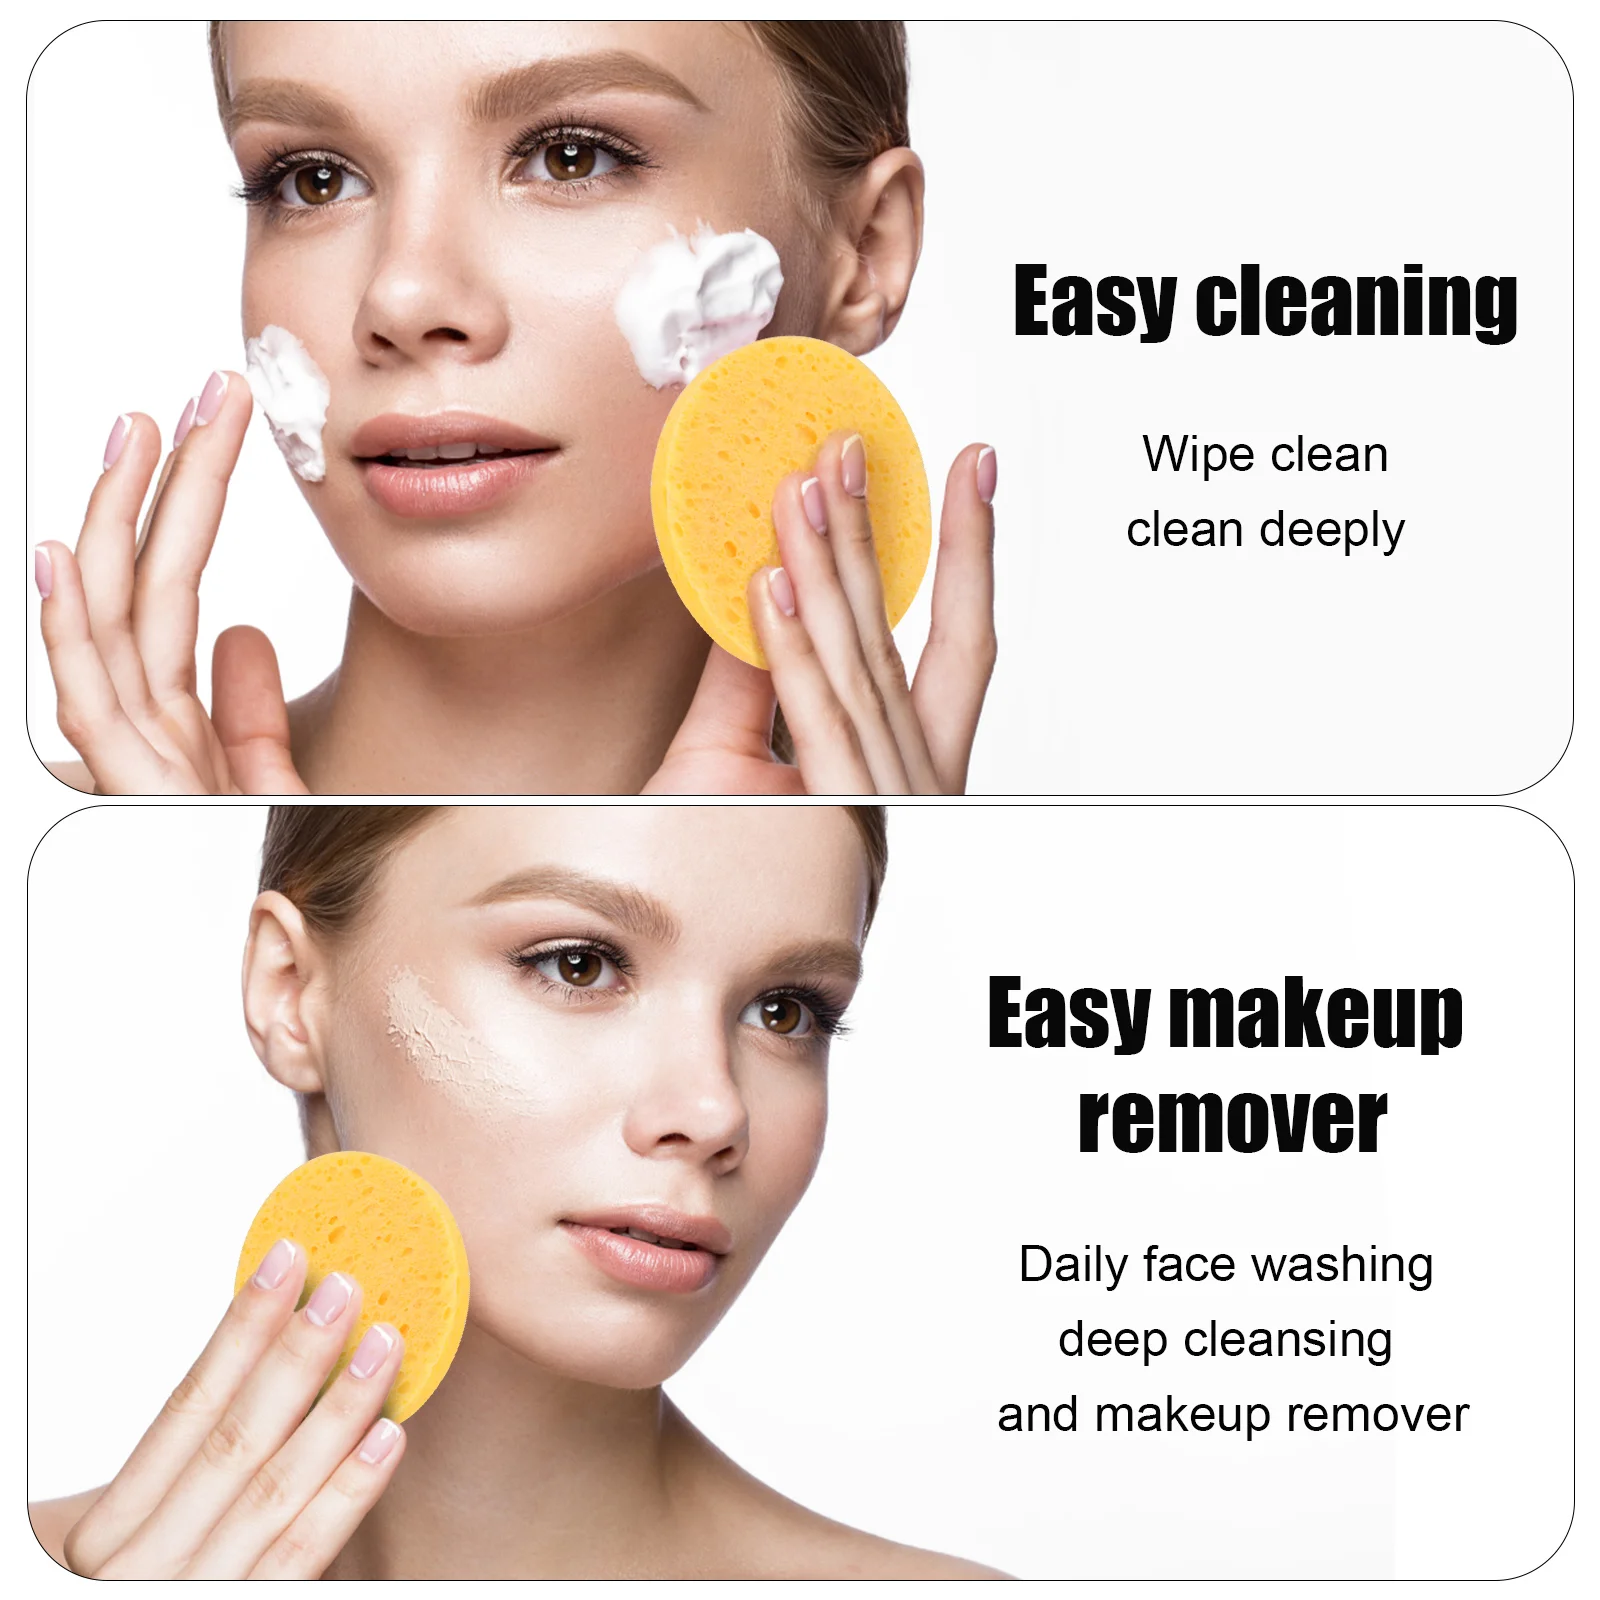 

Face Makeup Puffs Sponges Sponge Facial Cleaning Puff Remover Scrubber Cleansing Washing Exfoliating Girl Tool Accessories Wash